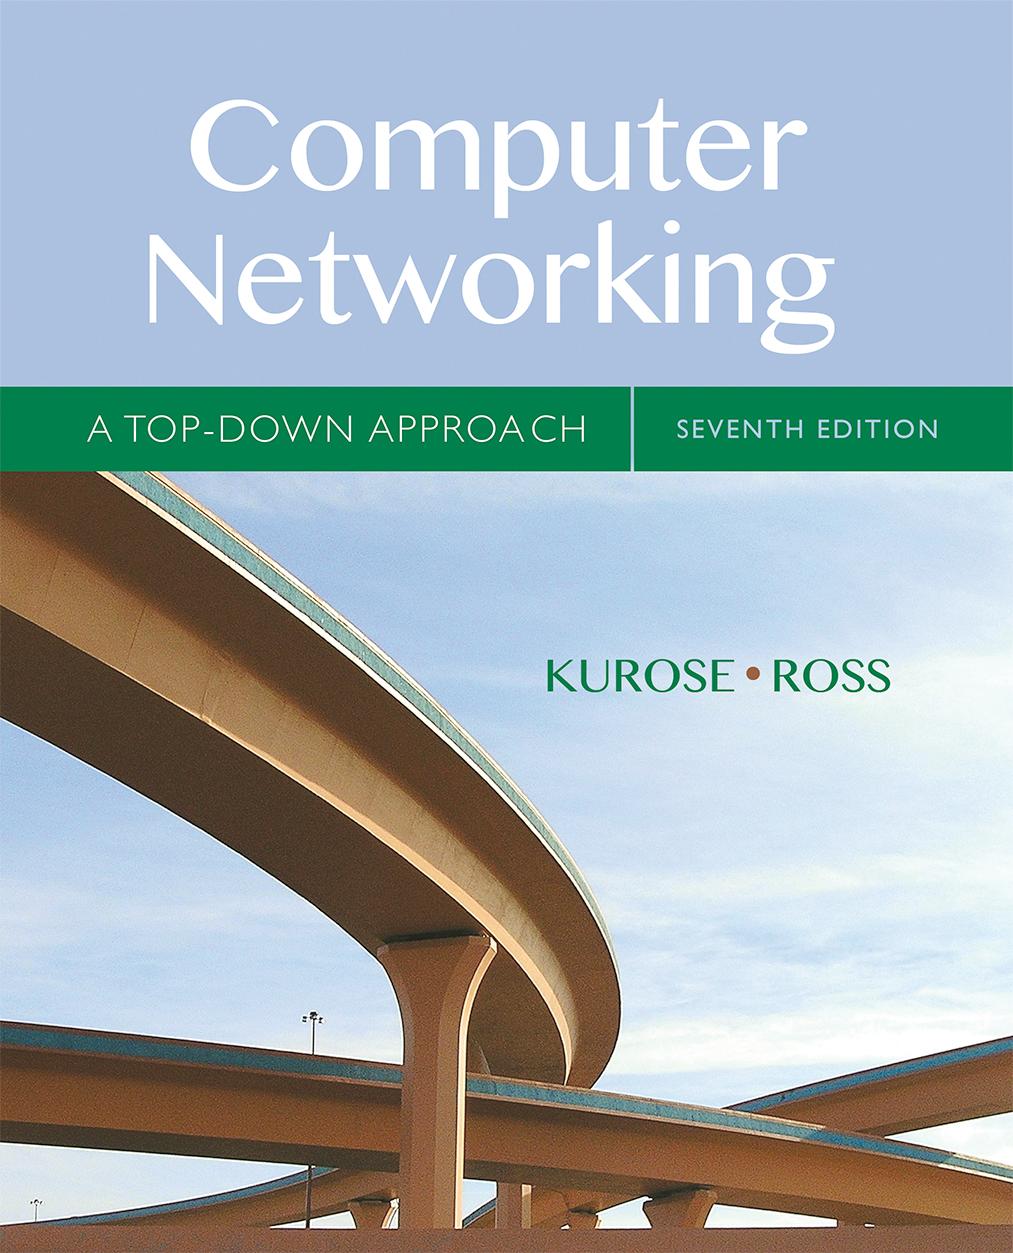 Wireshark Lab: HTTP SOLUTION Supplement to Computer Networking: A Top-Down Approach, 7th ed., J.F. Kurose and K.W. Ross 2005-2012, J.F Kurose and K.W. Ross, All Rights Reserved The following screen shots showing the HTTP GET and HTTP reply answer these questions: 1.